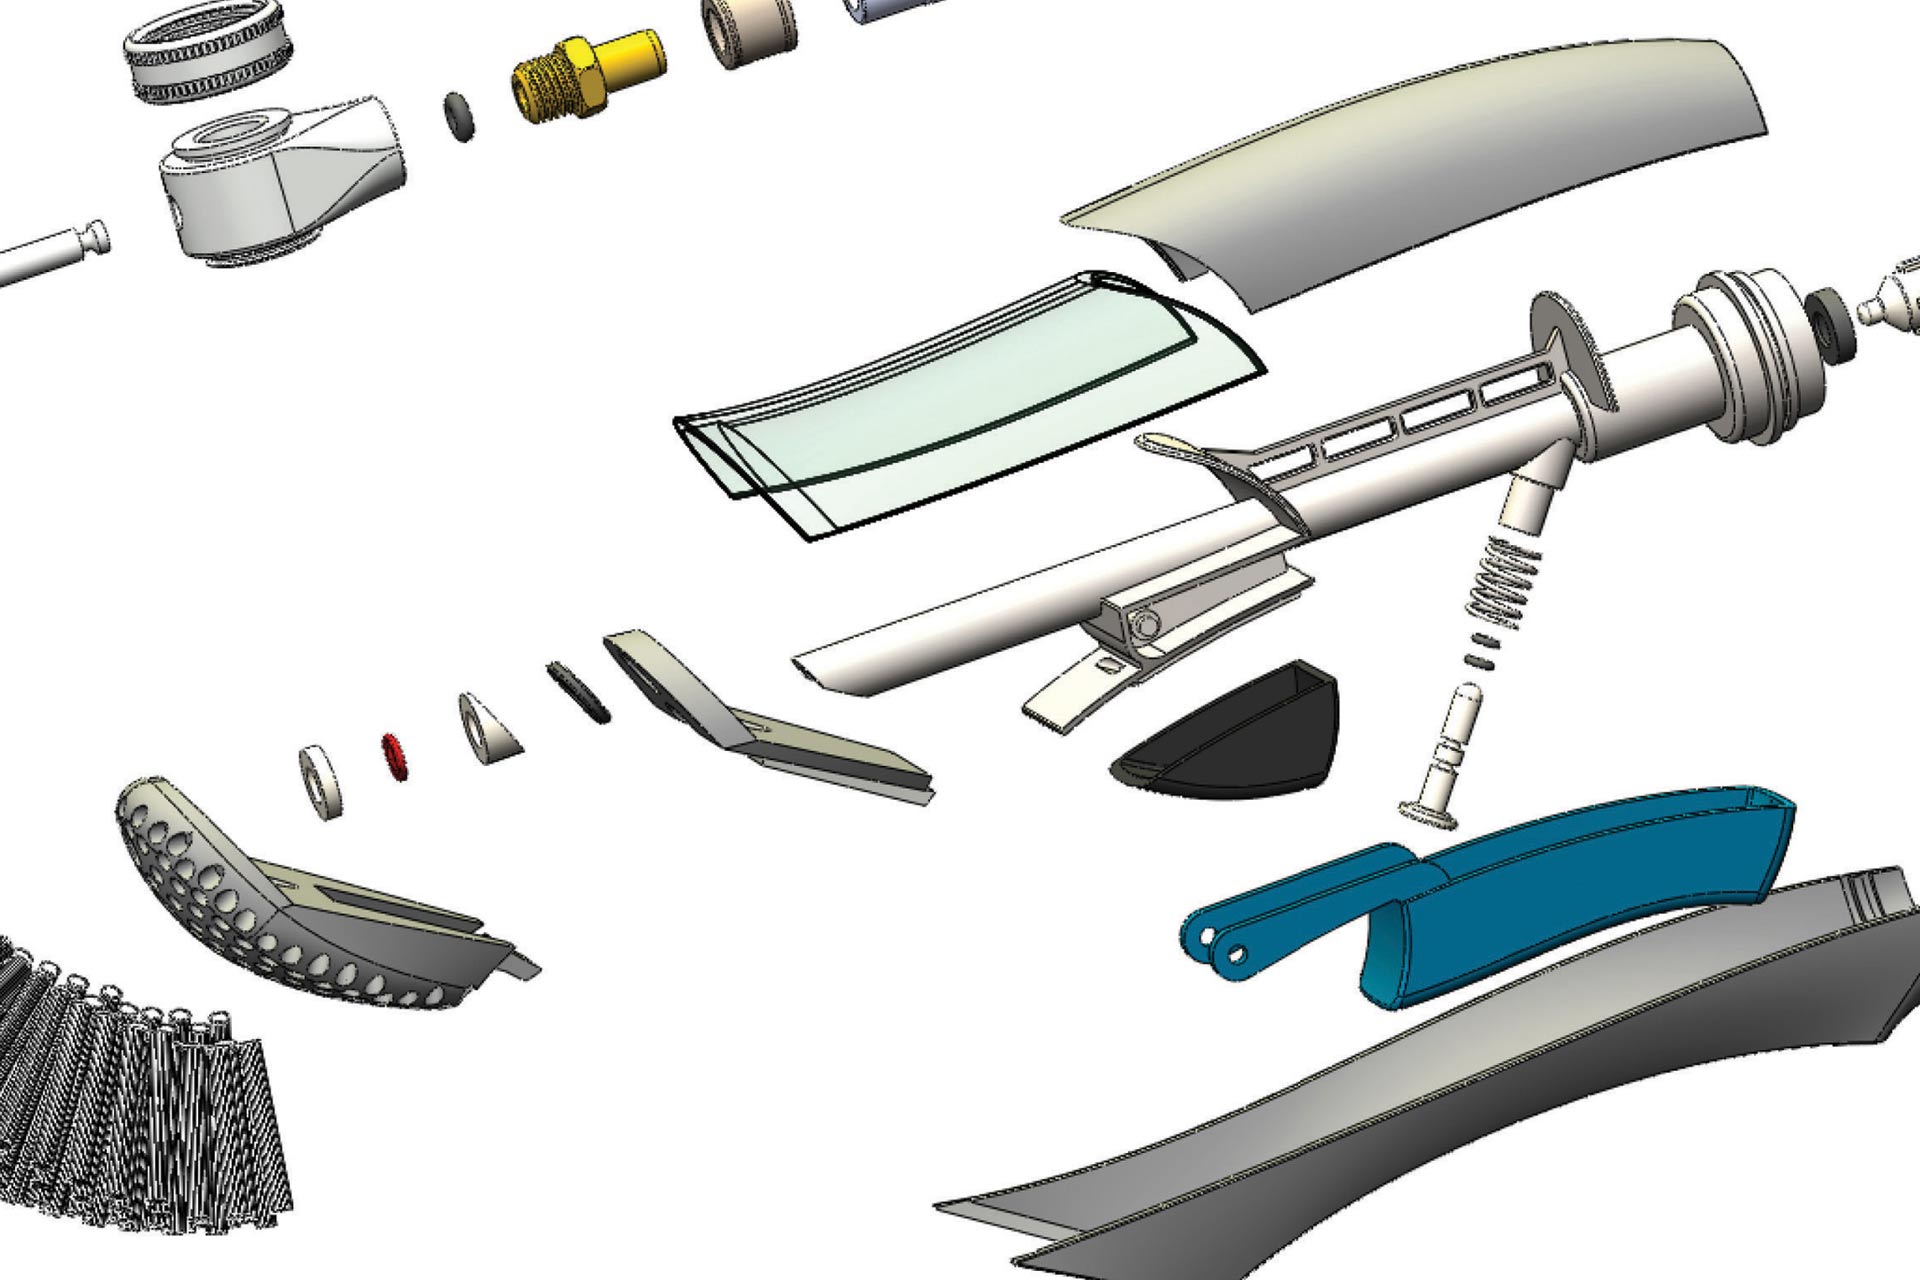 A CAD exploded view of a dish scrubber